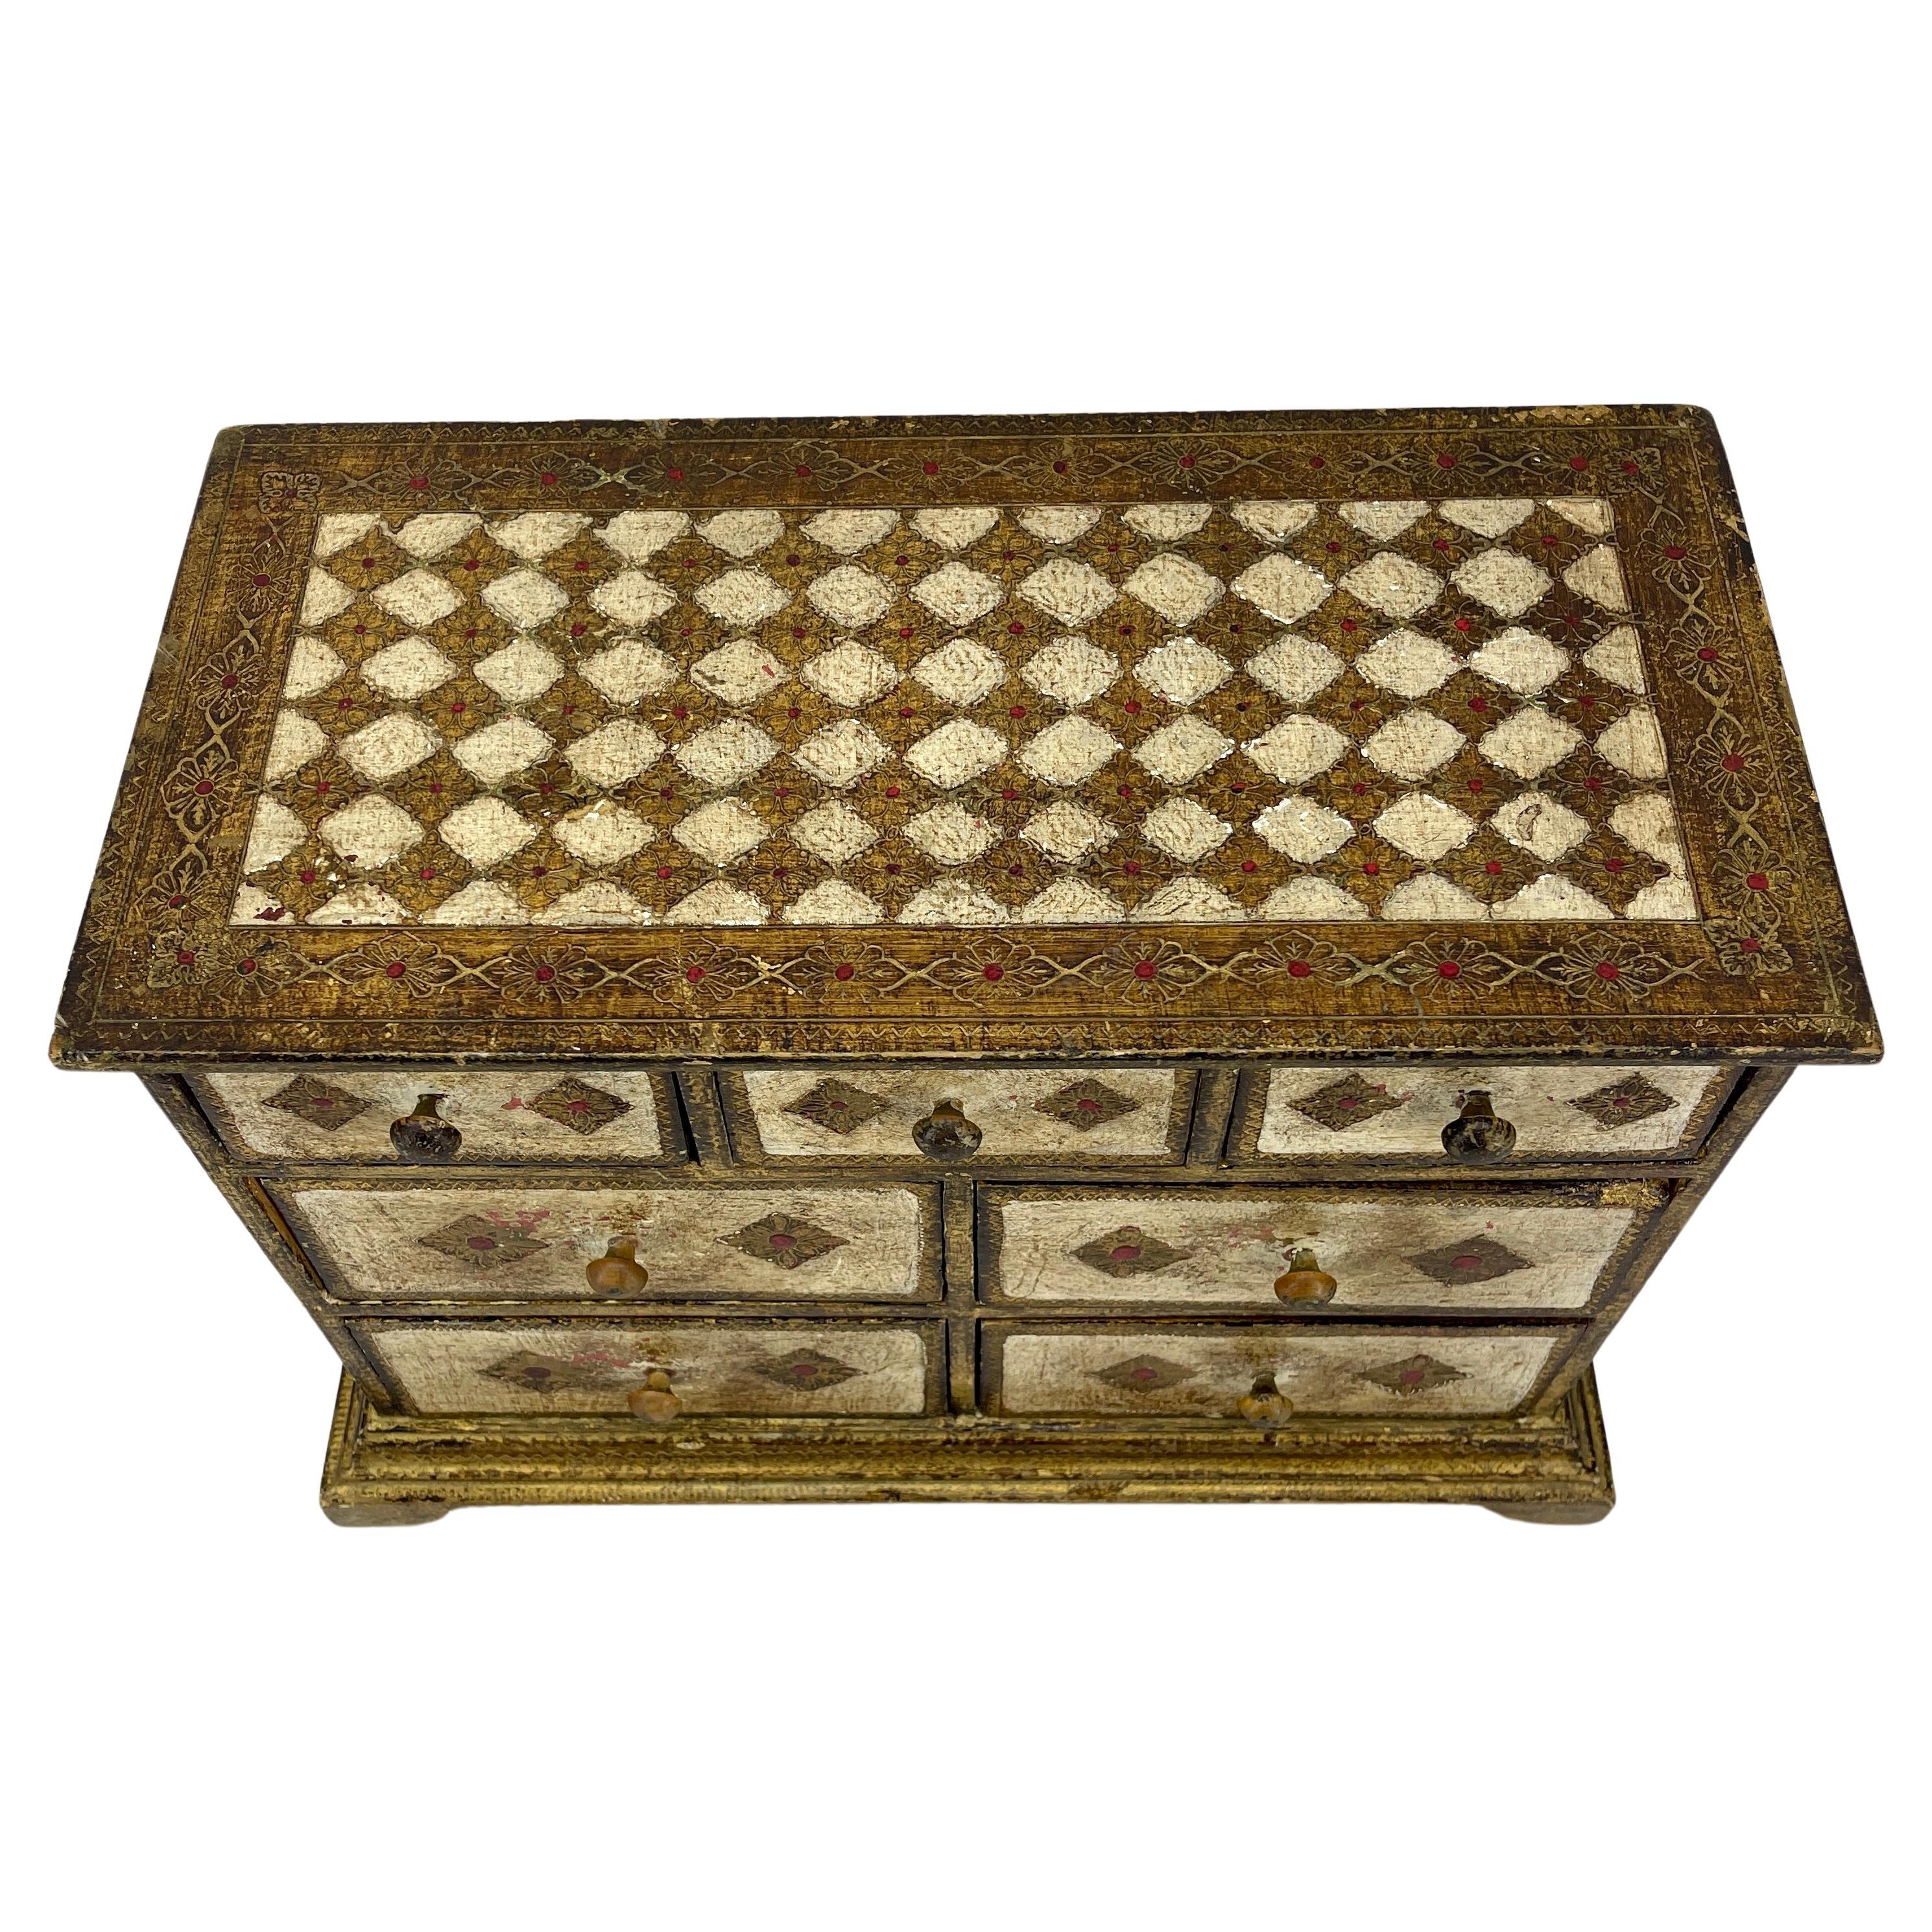 Hand-Painted Large Gilt Wood Florentine Jewelry Box Chest of Drawers, Italy 1950's